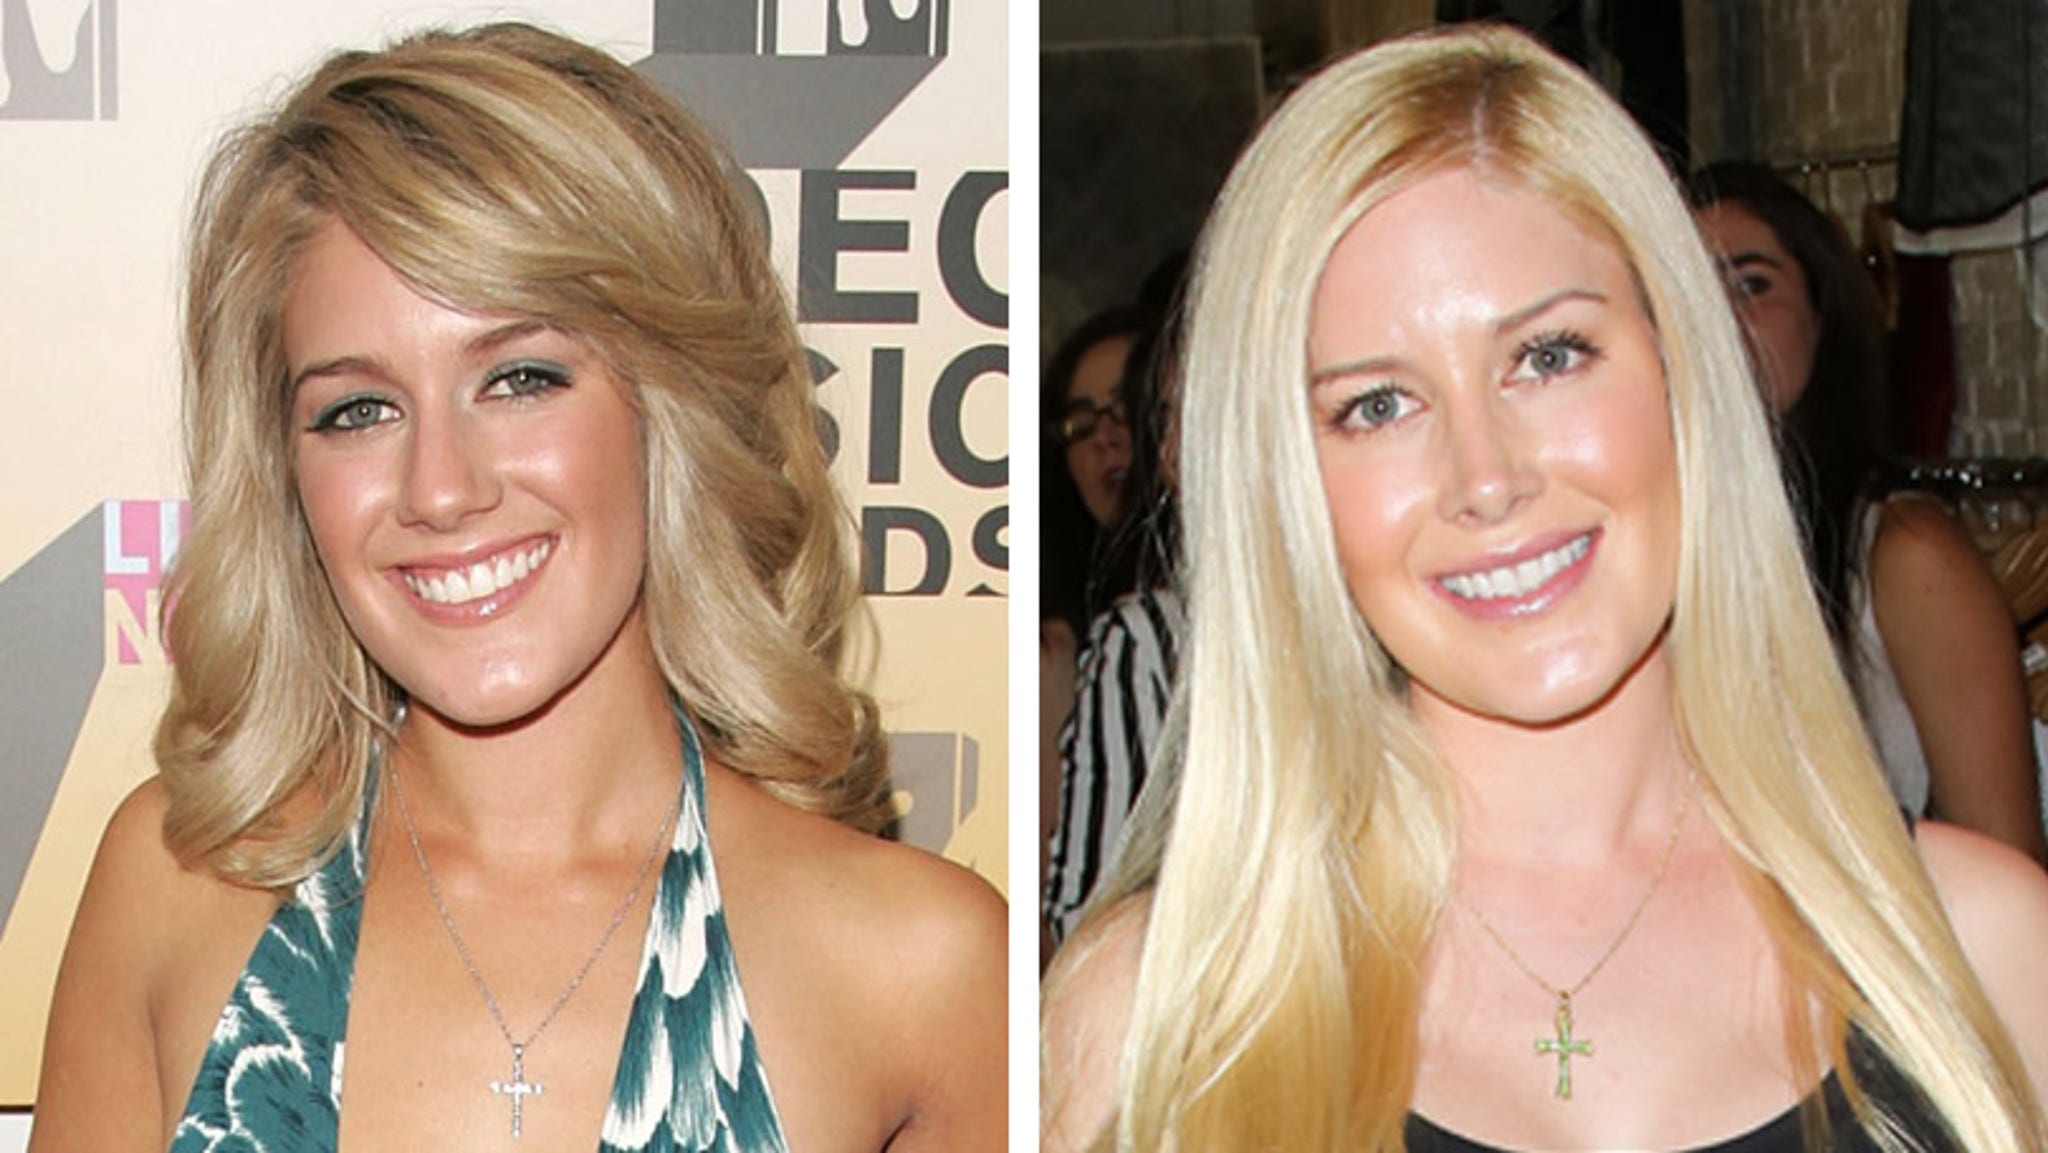 Heidi Montag Other Stars Have Had Just as Many Surgeries